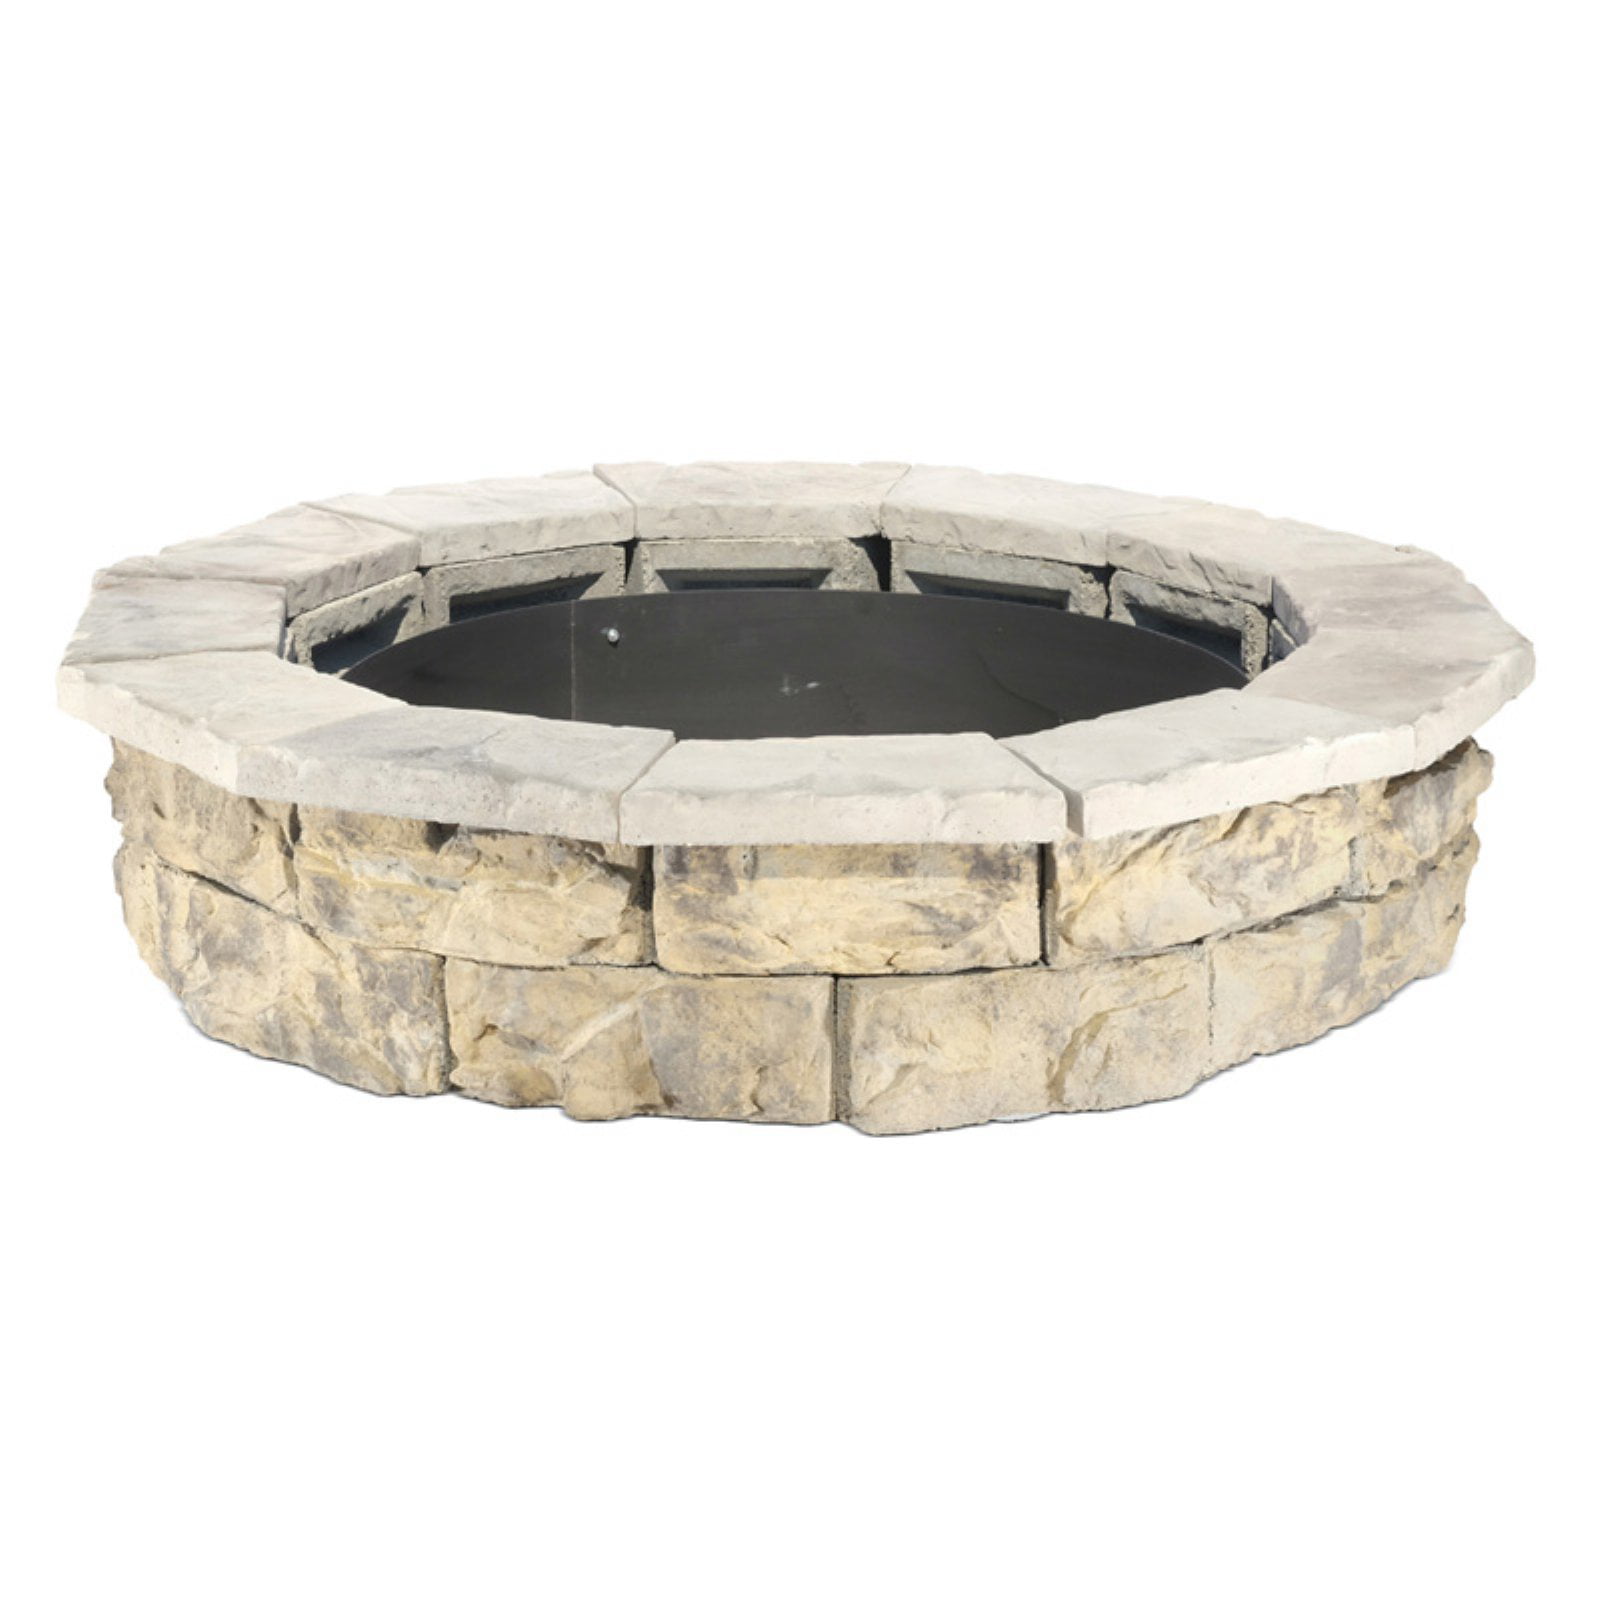 Pantheon Round Diy Fire Pit Kit, How To Build A Round Concrete Fire Pit